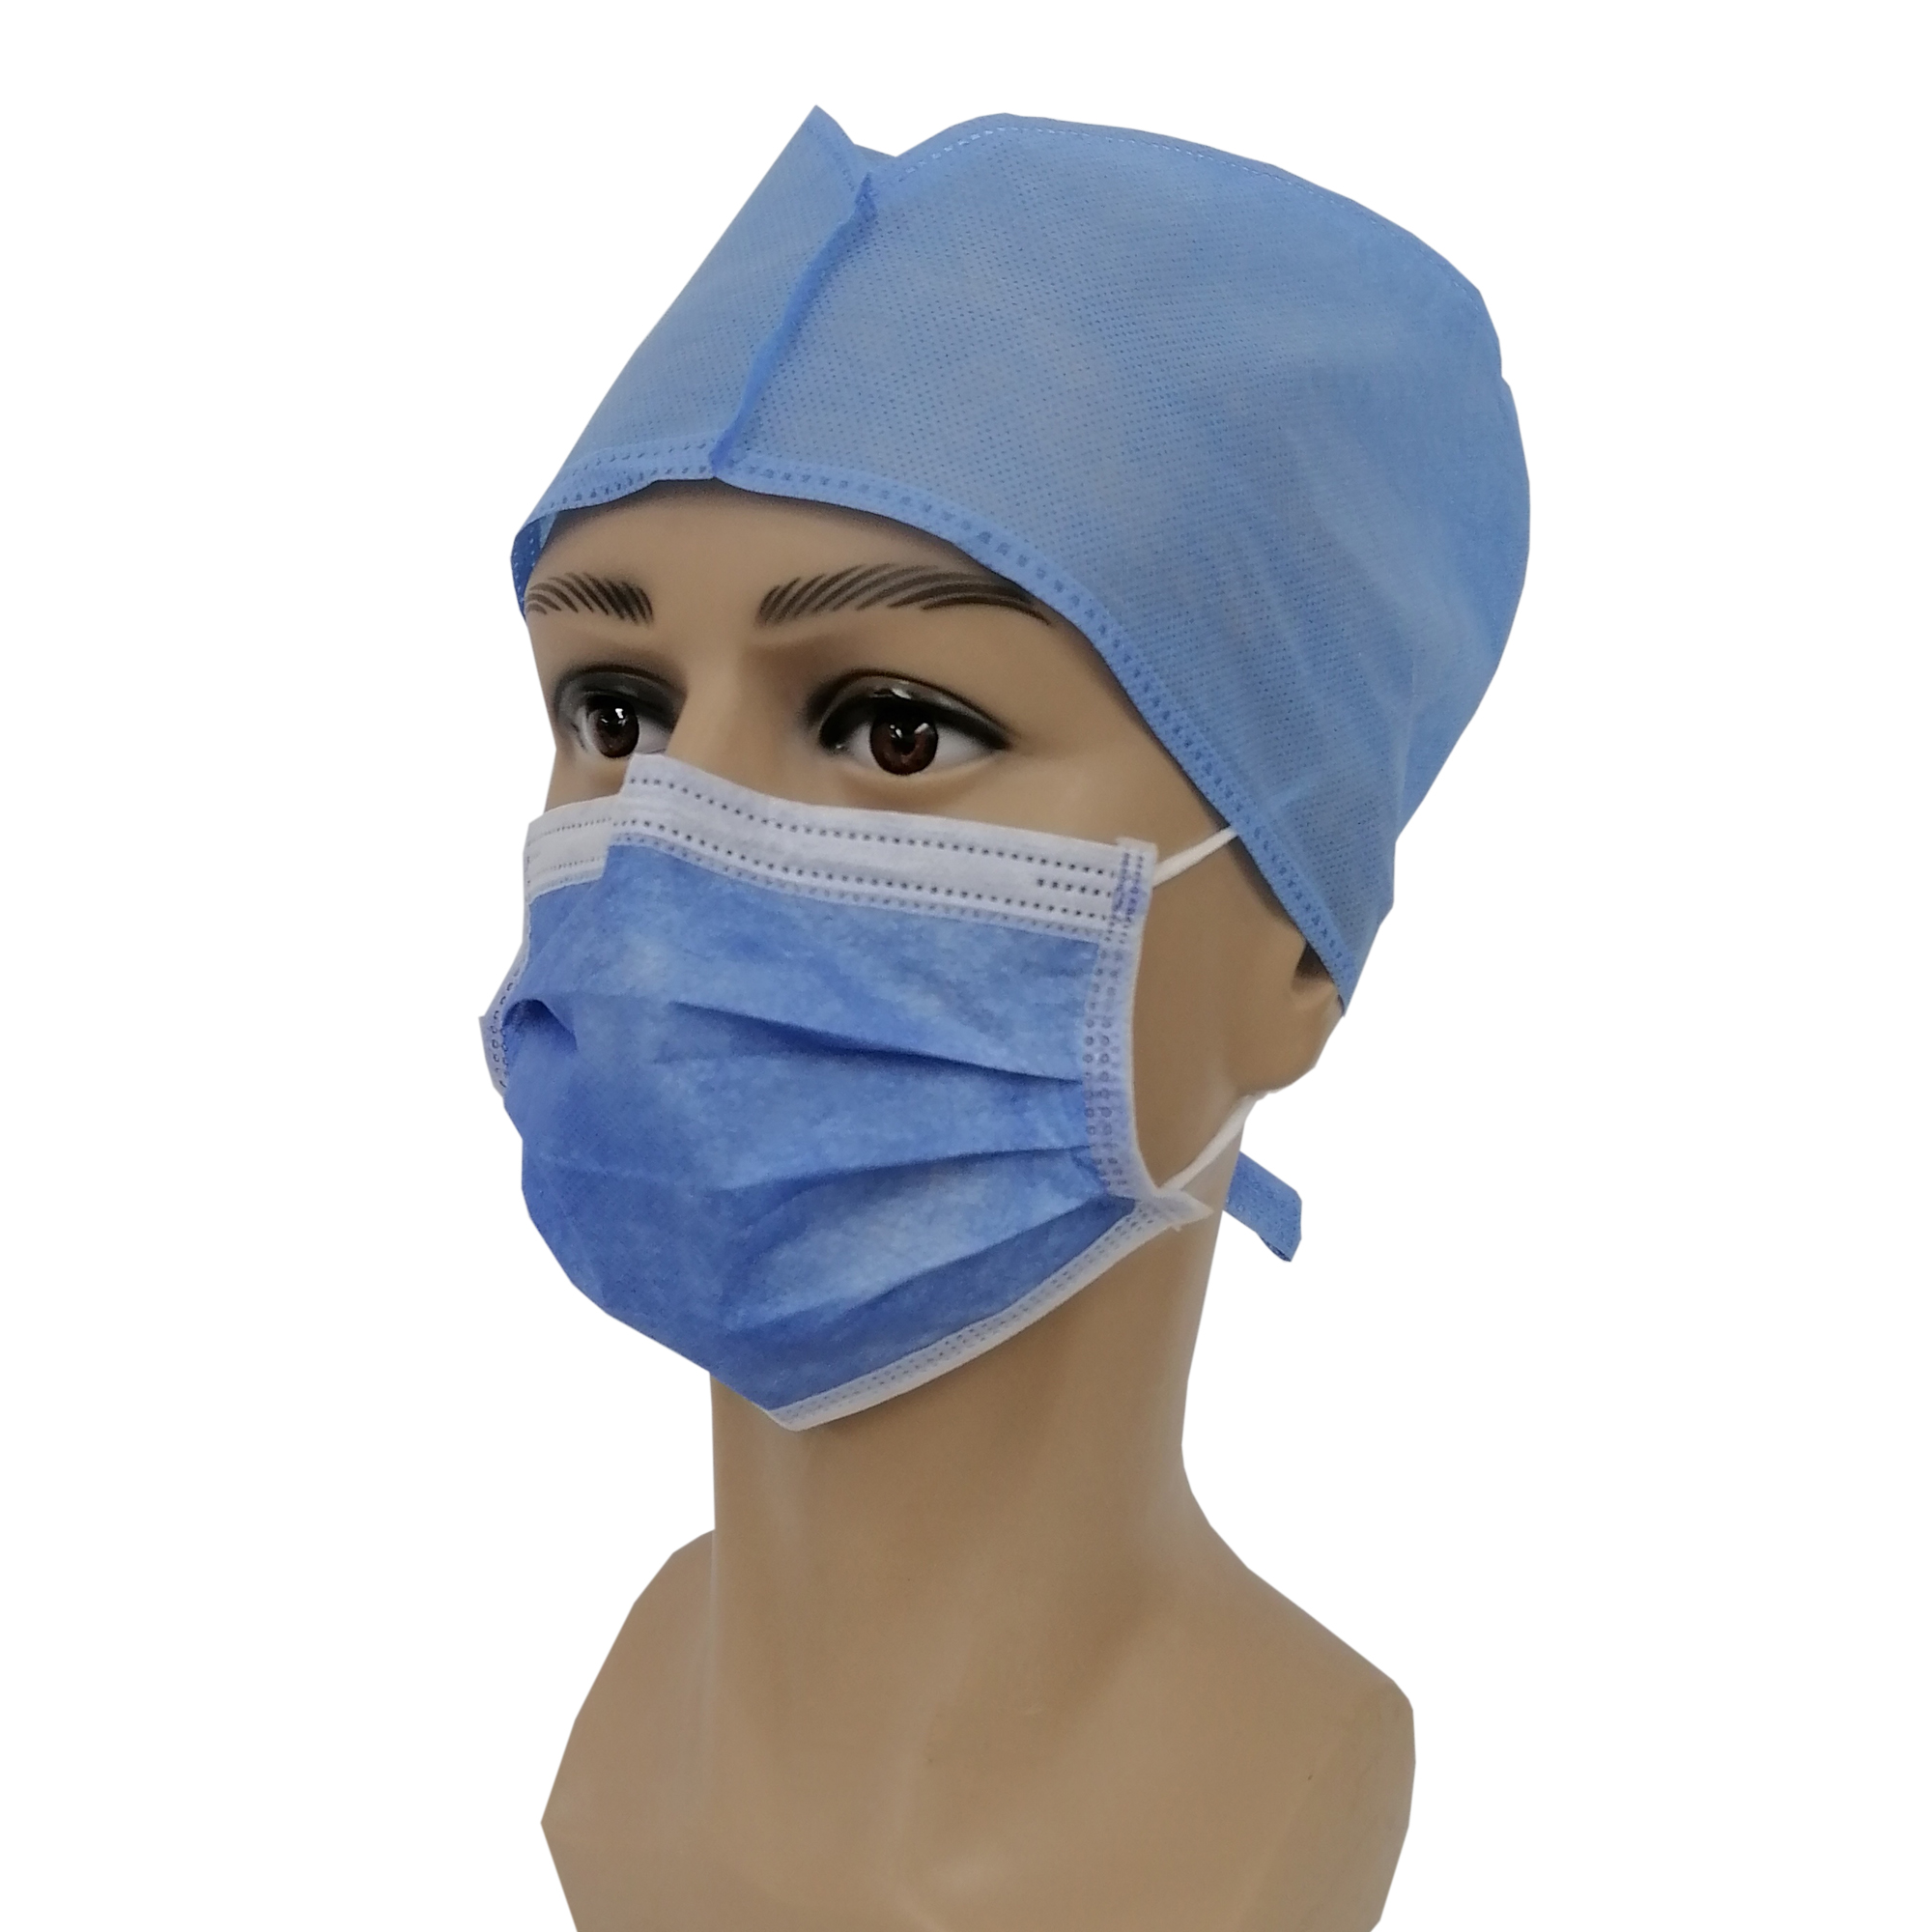 Disposable medical AAMI Level 3 USA face mask with earloop 